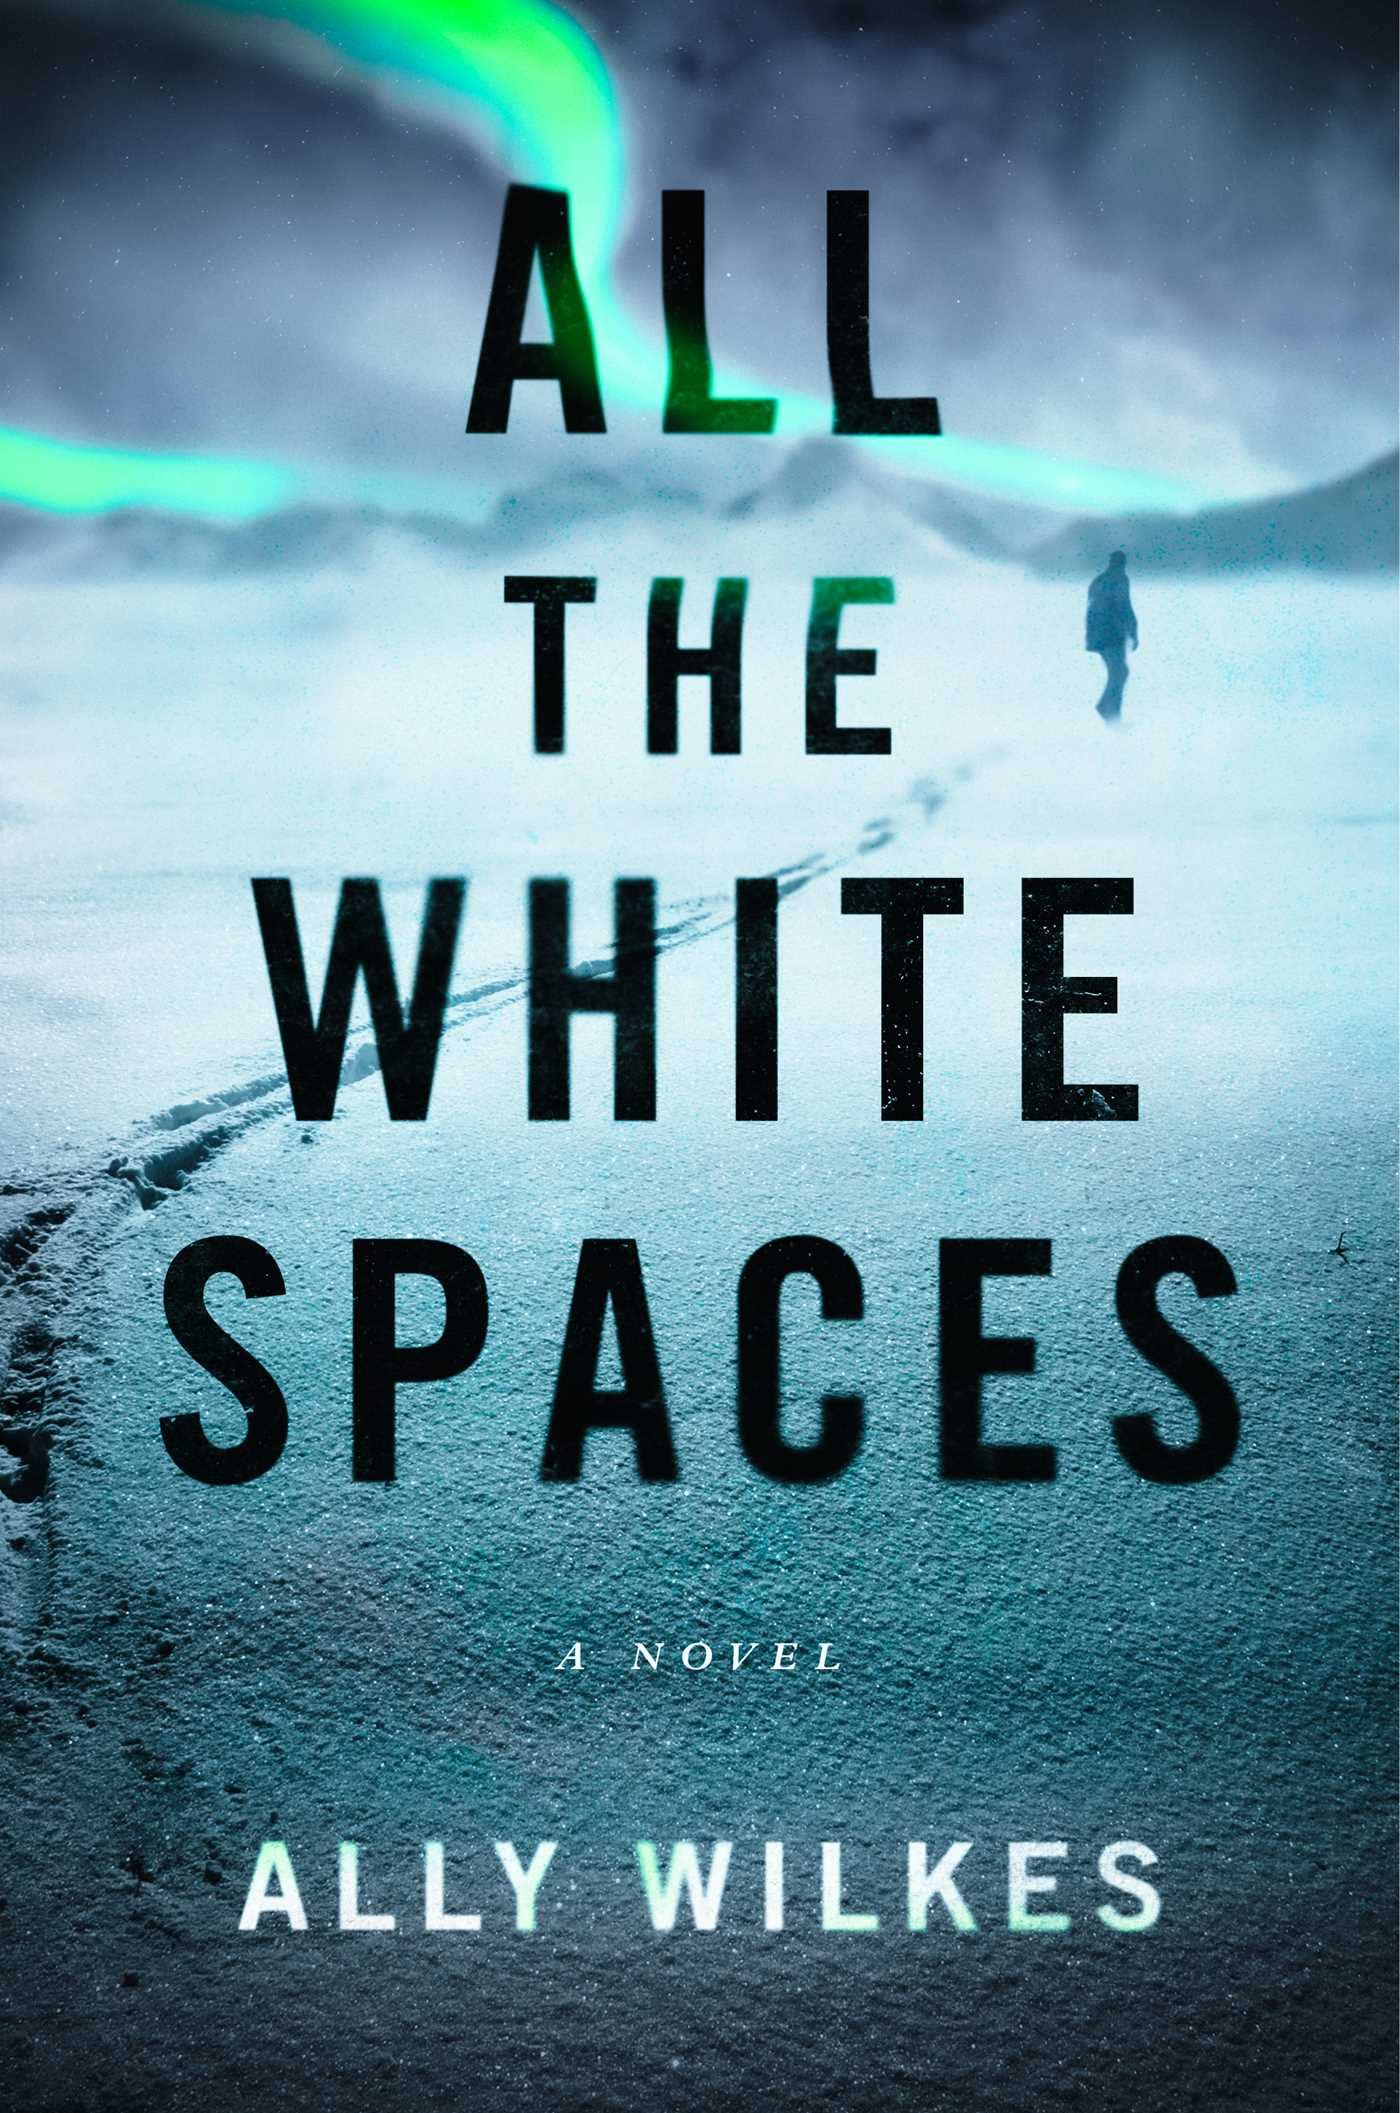 Image for "All the White Spaces"